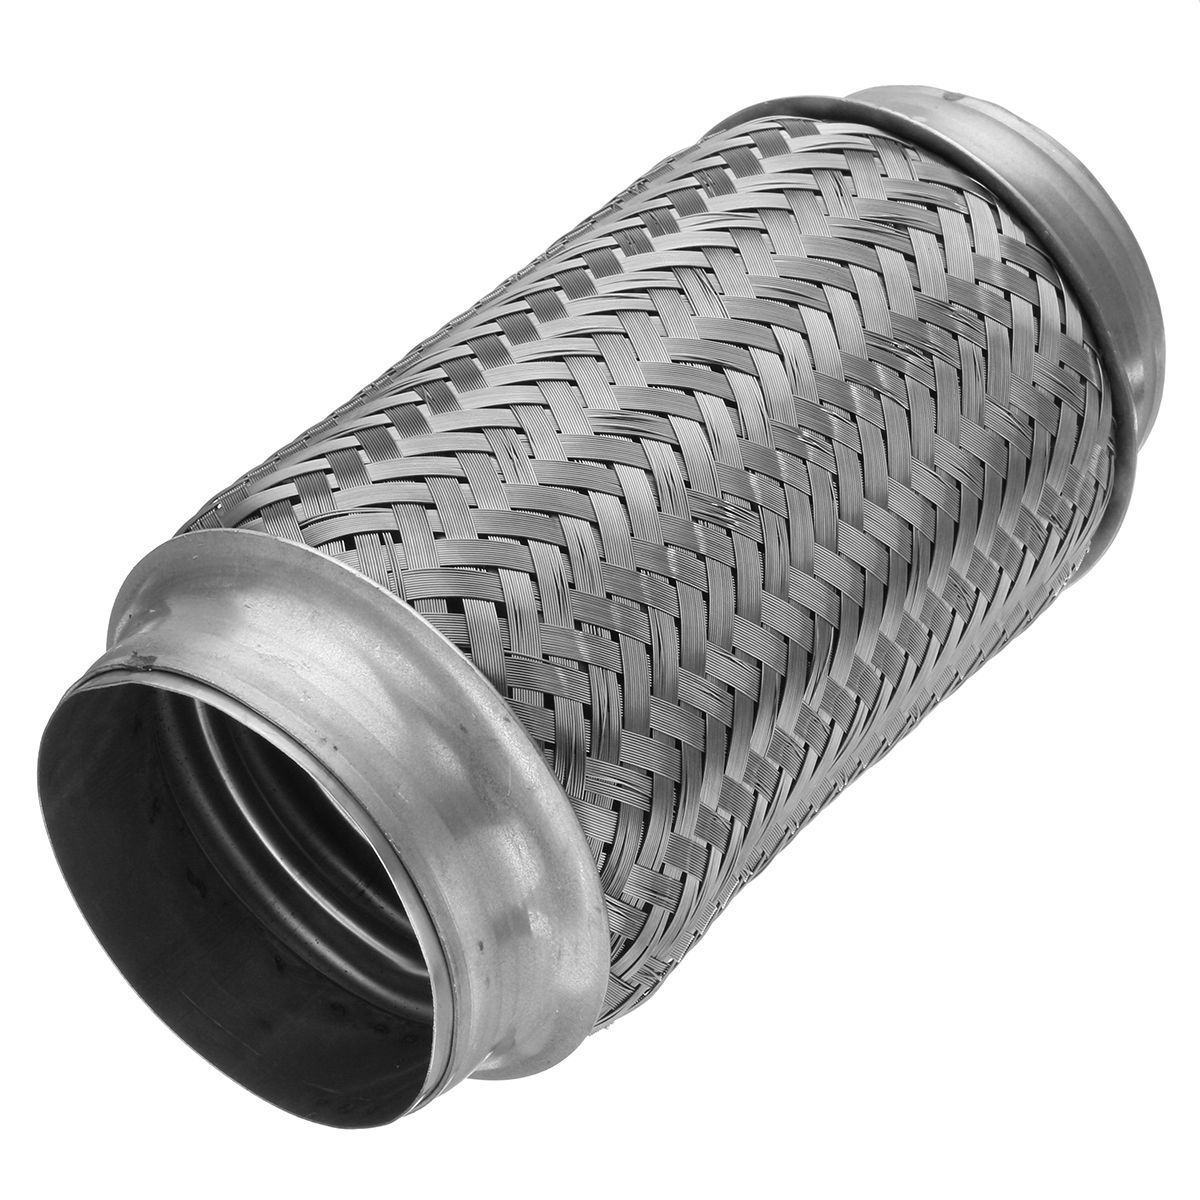 3x8-Inch-Flex-Pipe-Exhaust-Stainless-Steel-Double-Braid-Heavy-Duty-Coupling-Tube-1251545